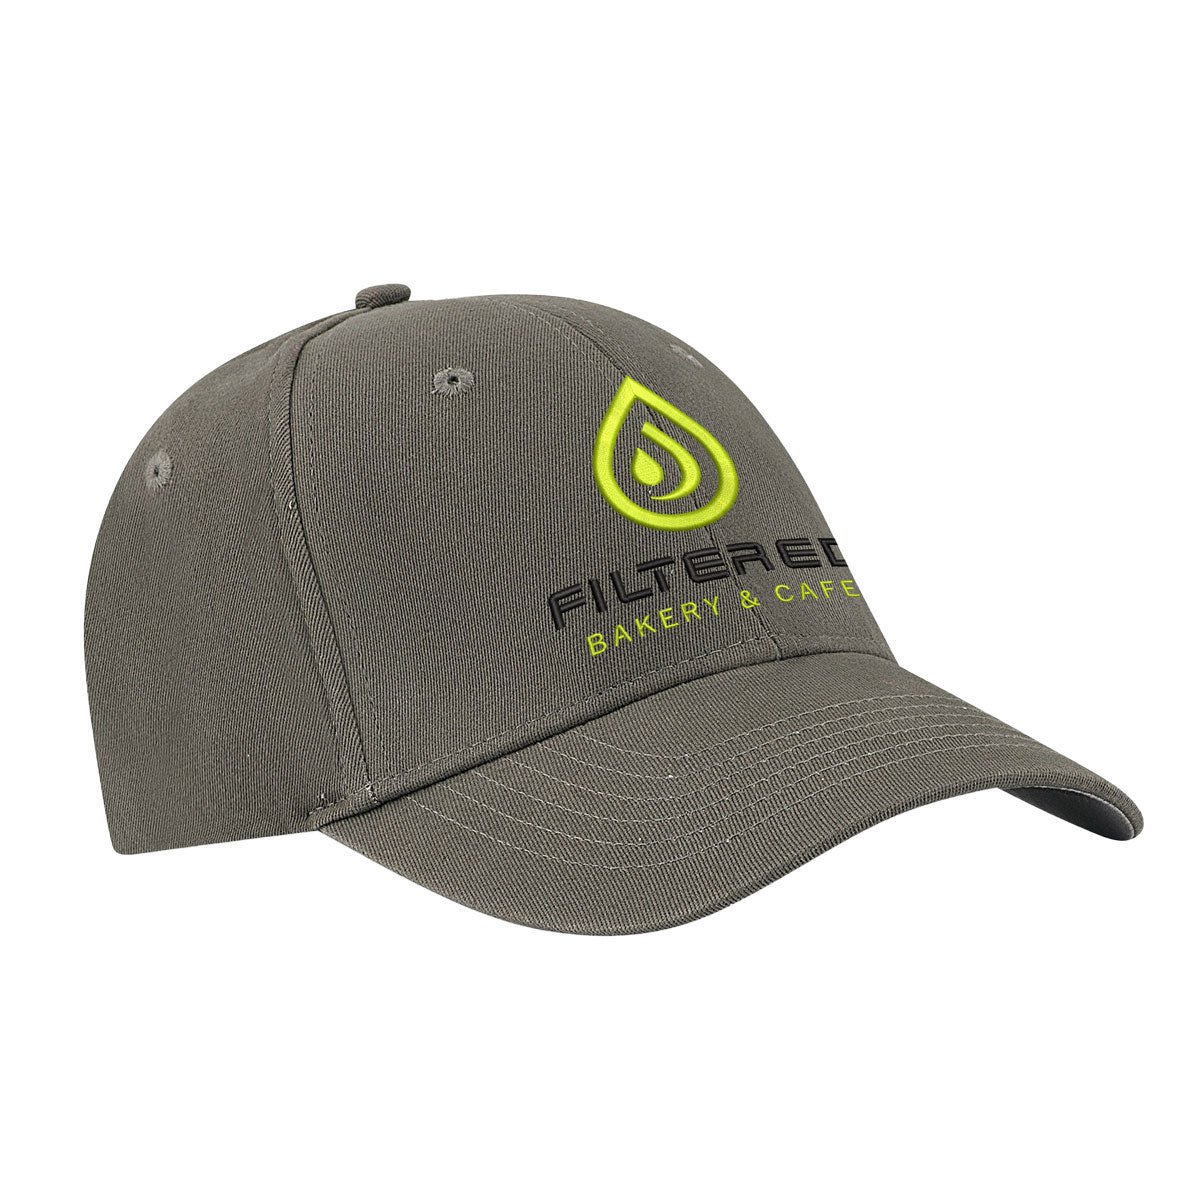 NU-FIT® pro style spandex fitted cap - Custom Embroidered